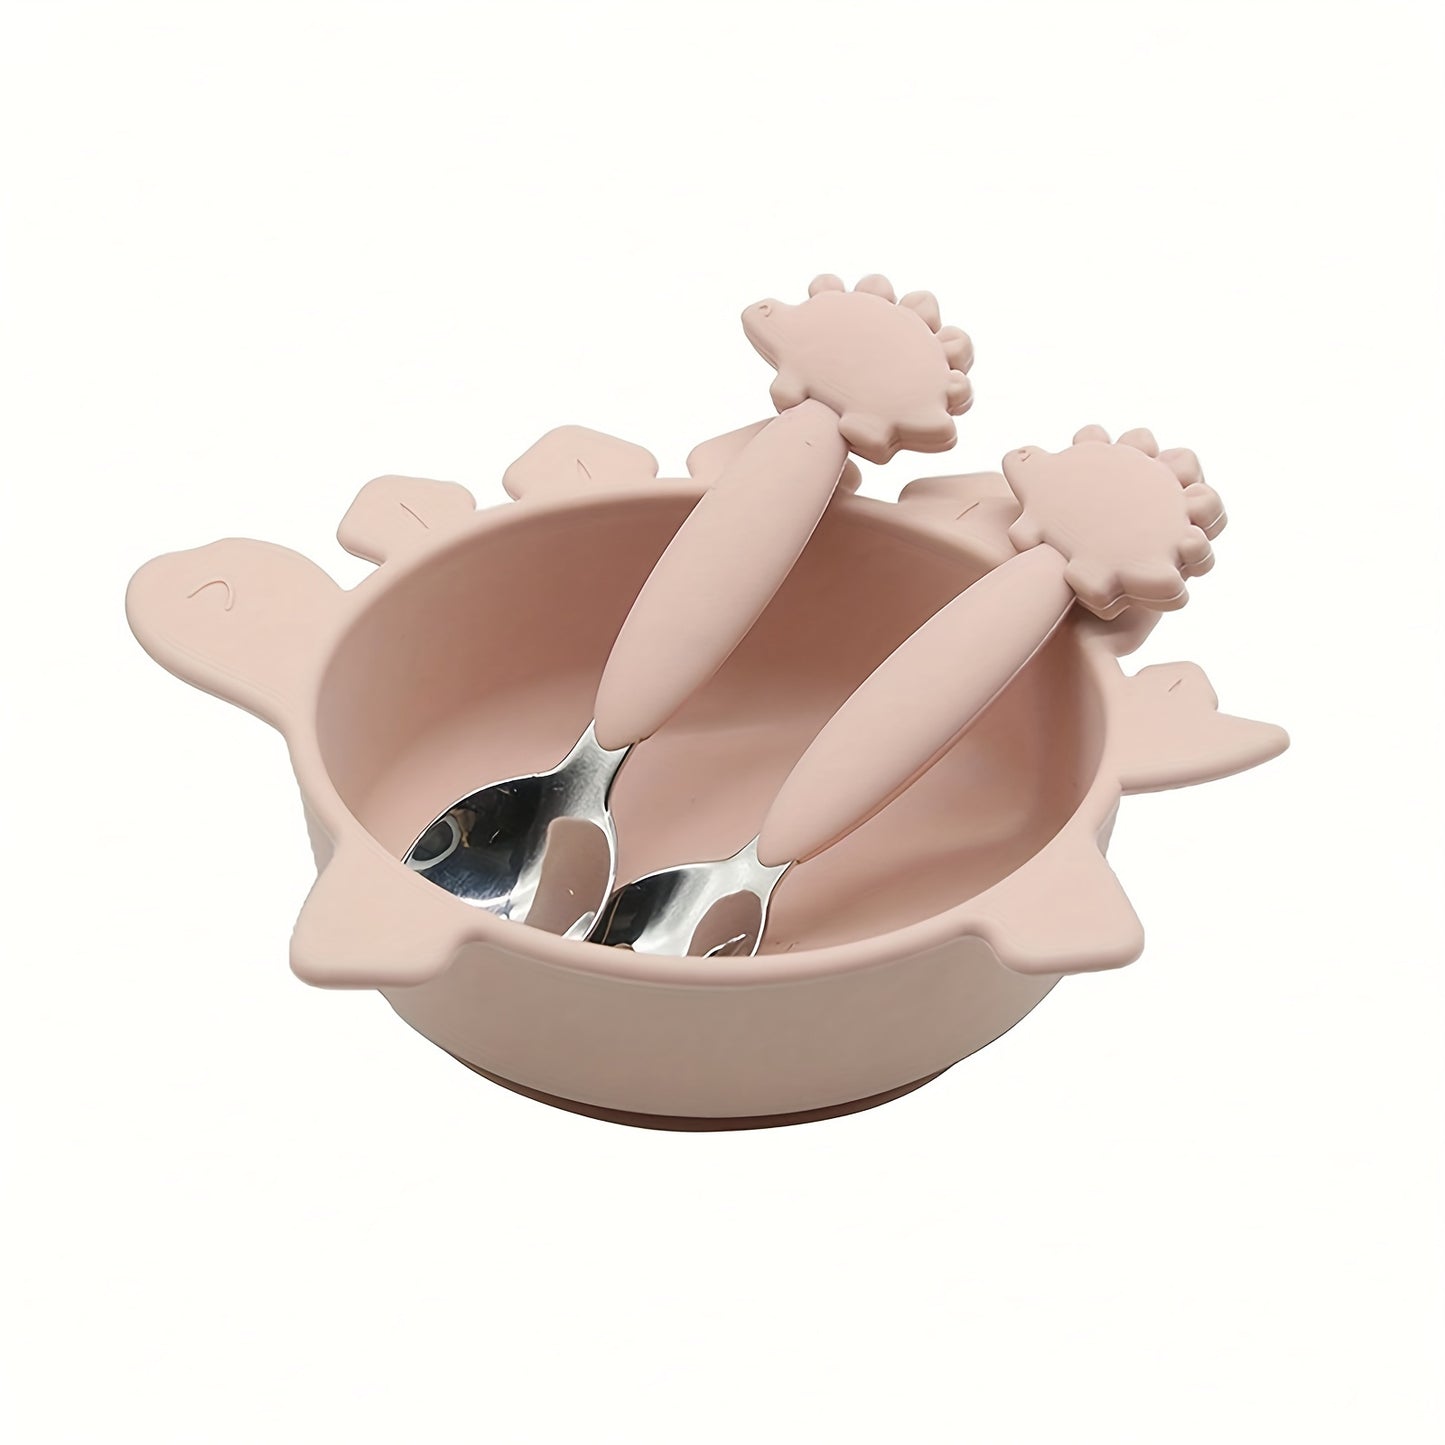 3pcs Dinosaur Cutlery Set Baby Toddler Silicone Suction Cup Bowl Food Grade Baby Special Food Supplement Bowl